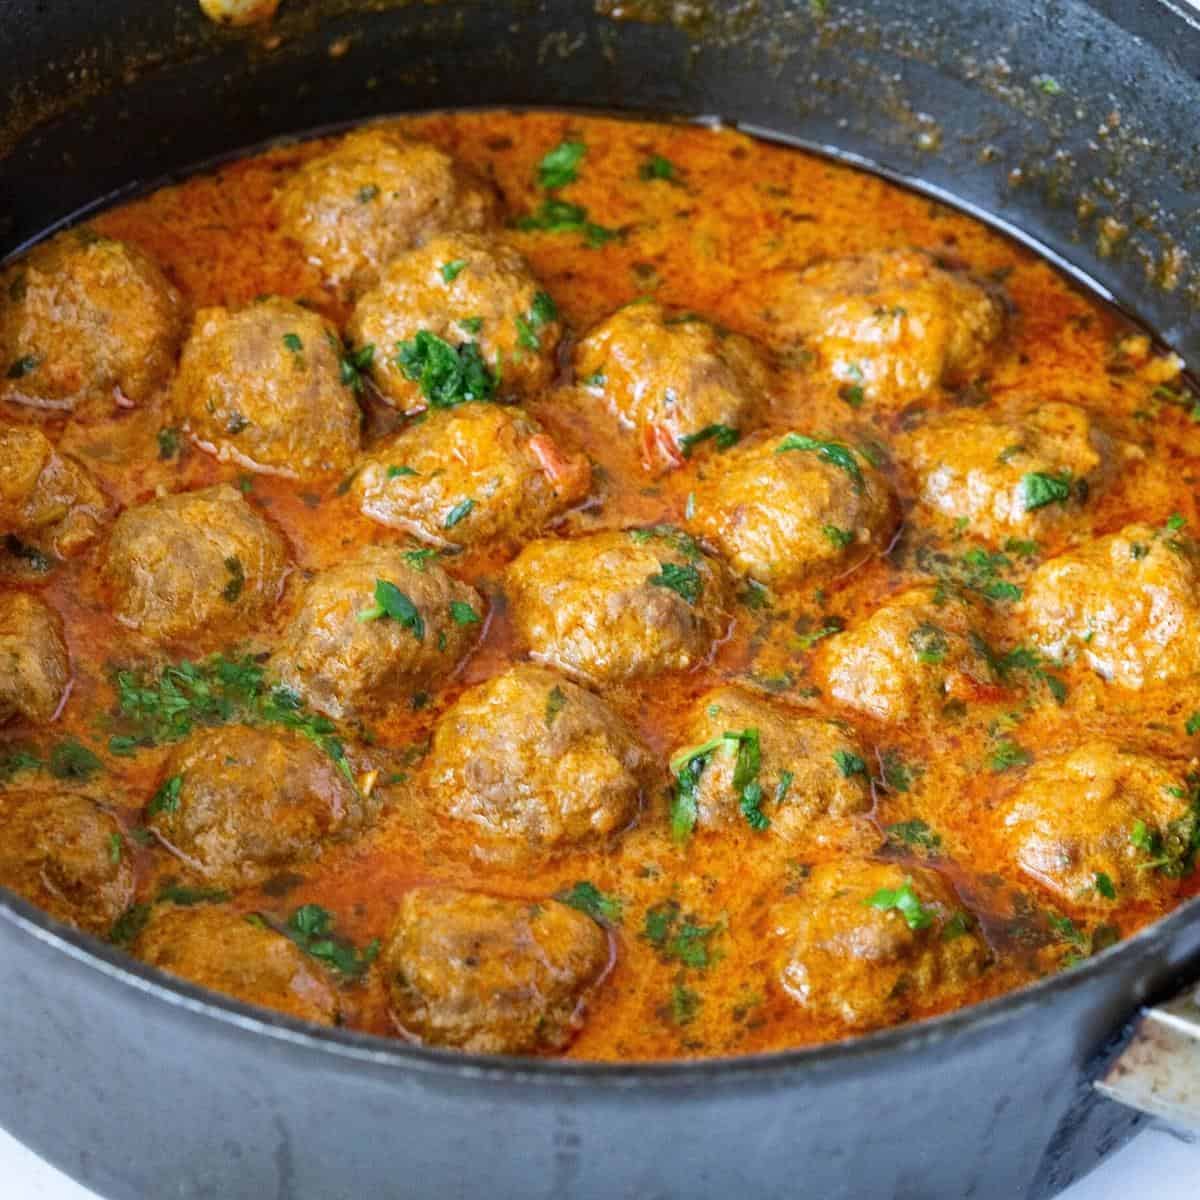 A pan with meatballs in curry.